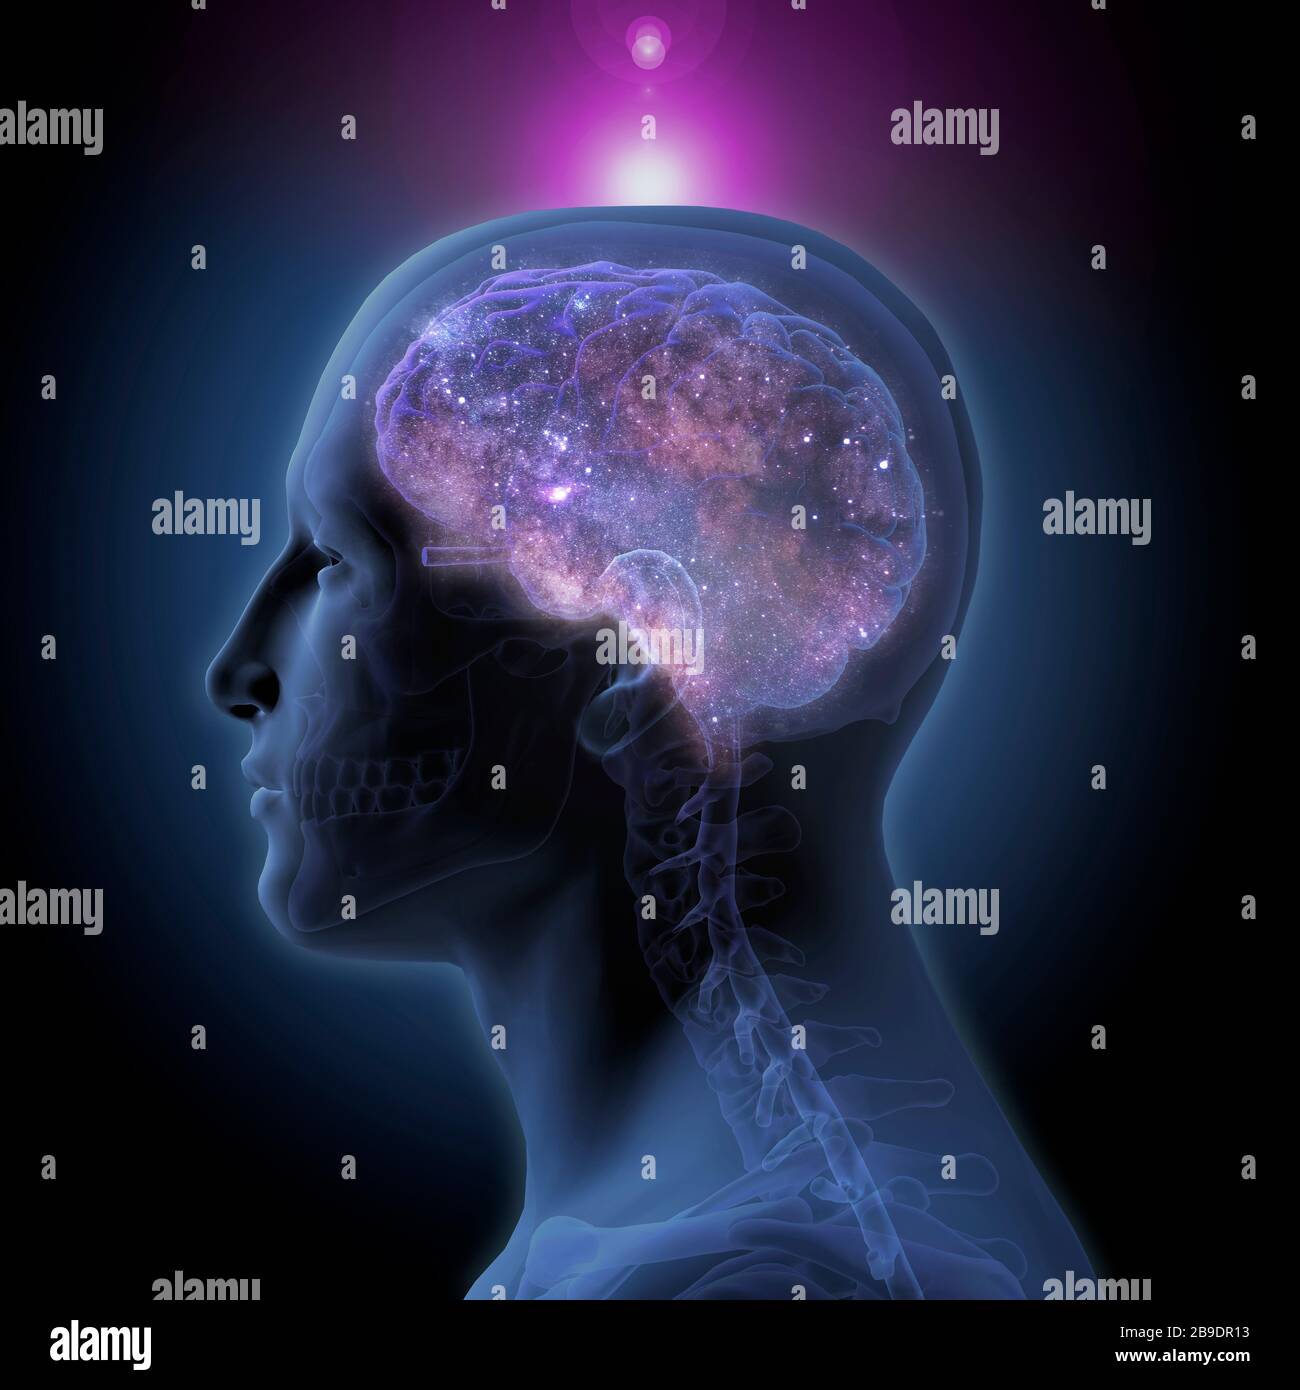 Profile of enlightened man with star-filled brain and glowing crown chakra. Stock Photo